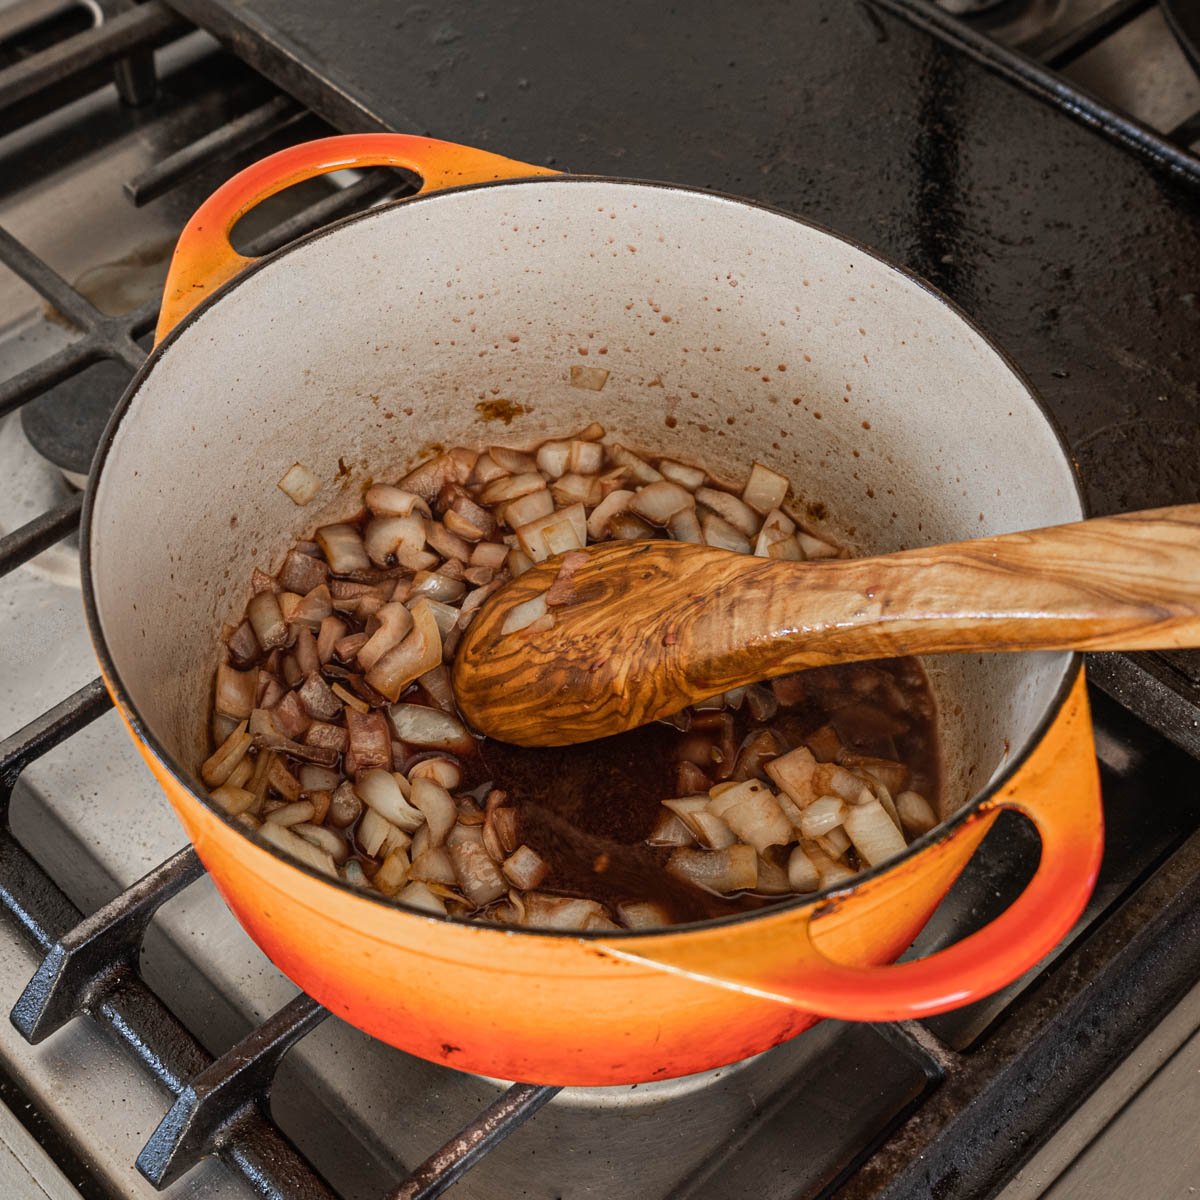 Adding red wine to a pan of onions browned in lamb drippings.